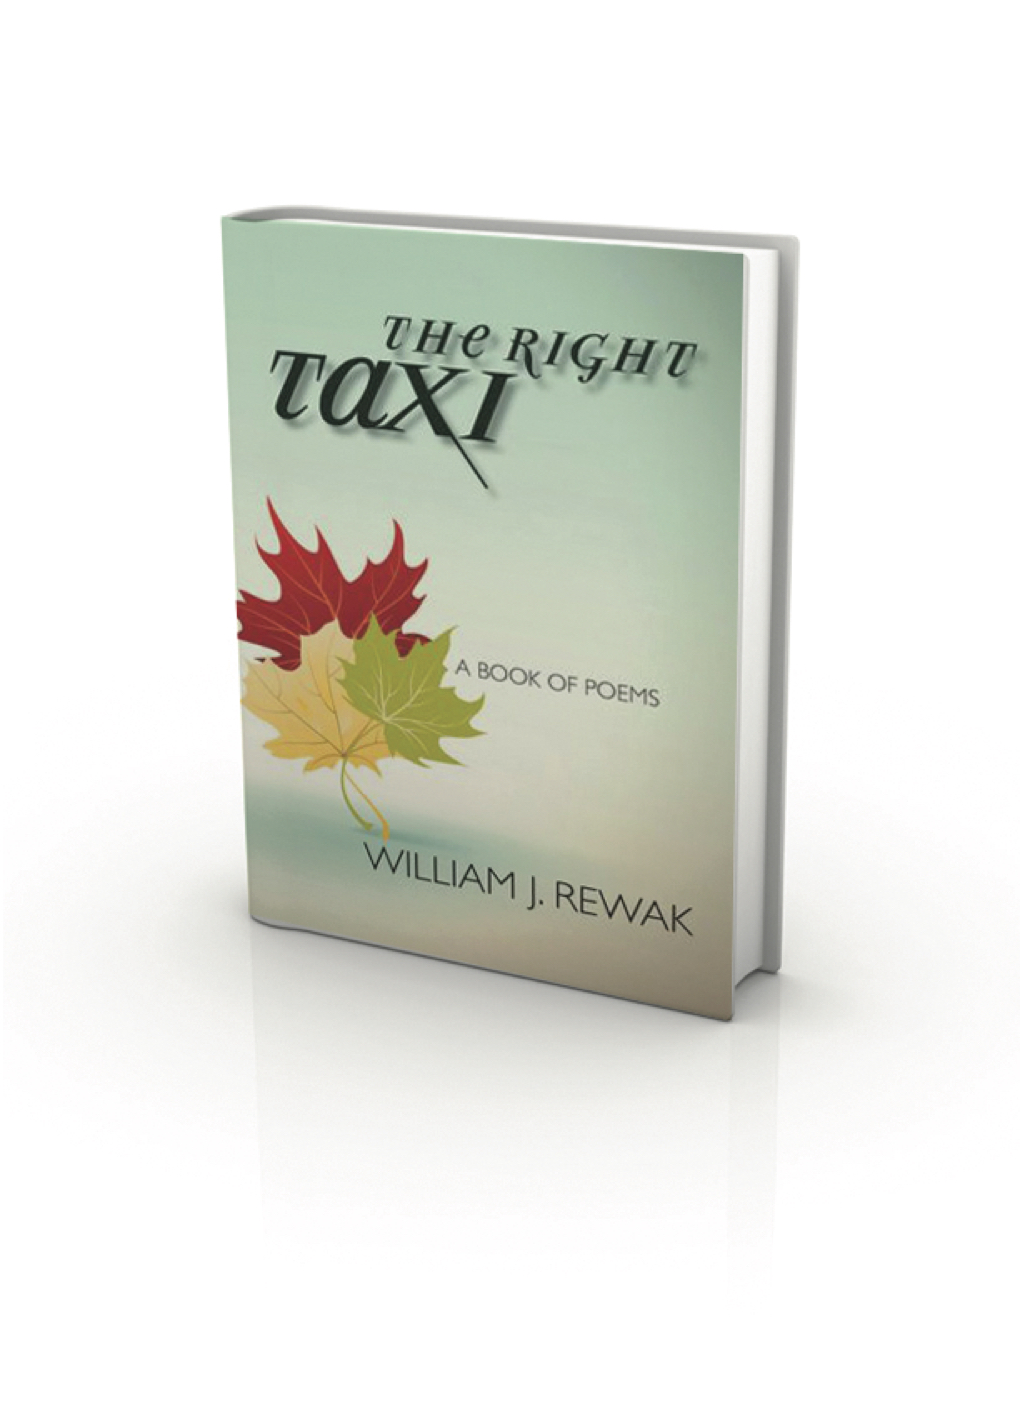 The Right Taxi by William J. Rewak, S.J.